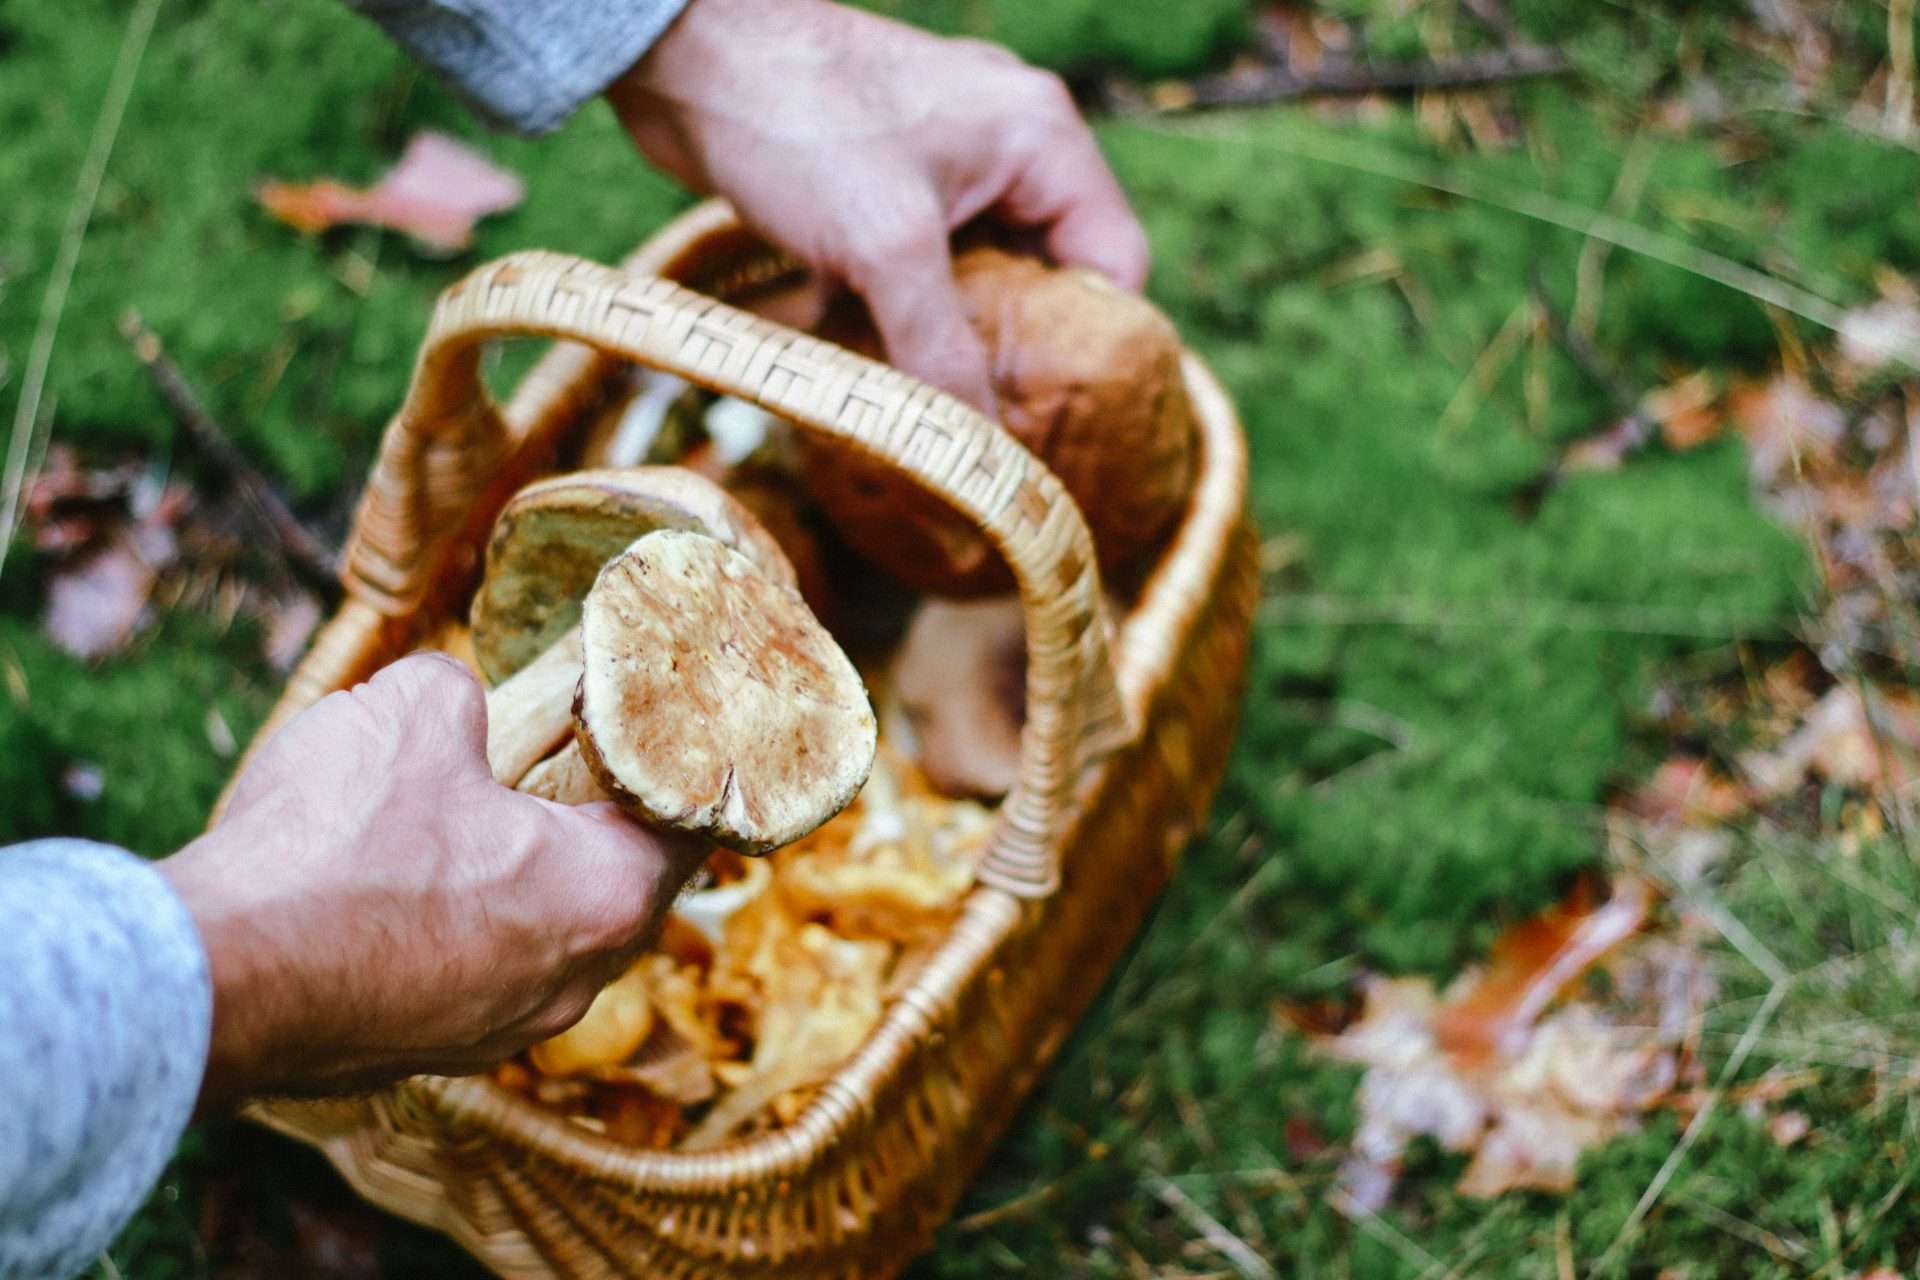 Person putting mushrooms into a basket while foraging.